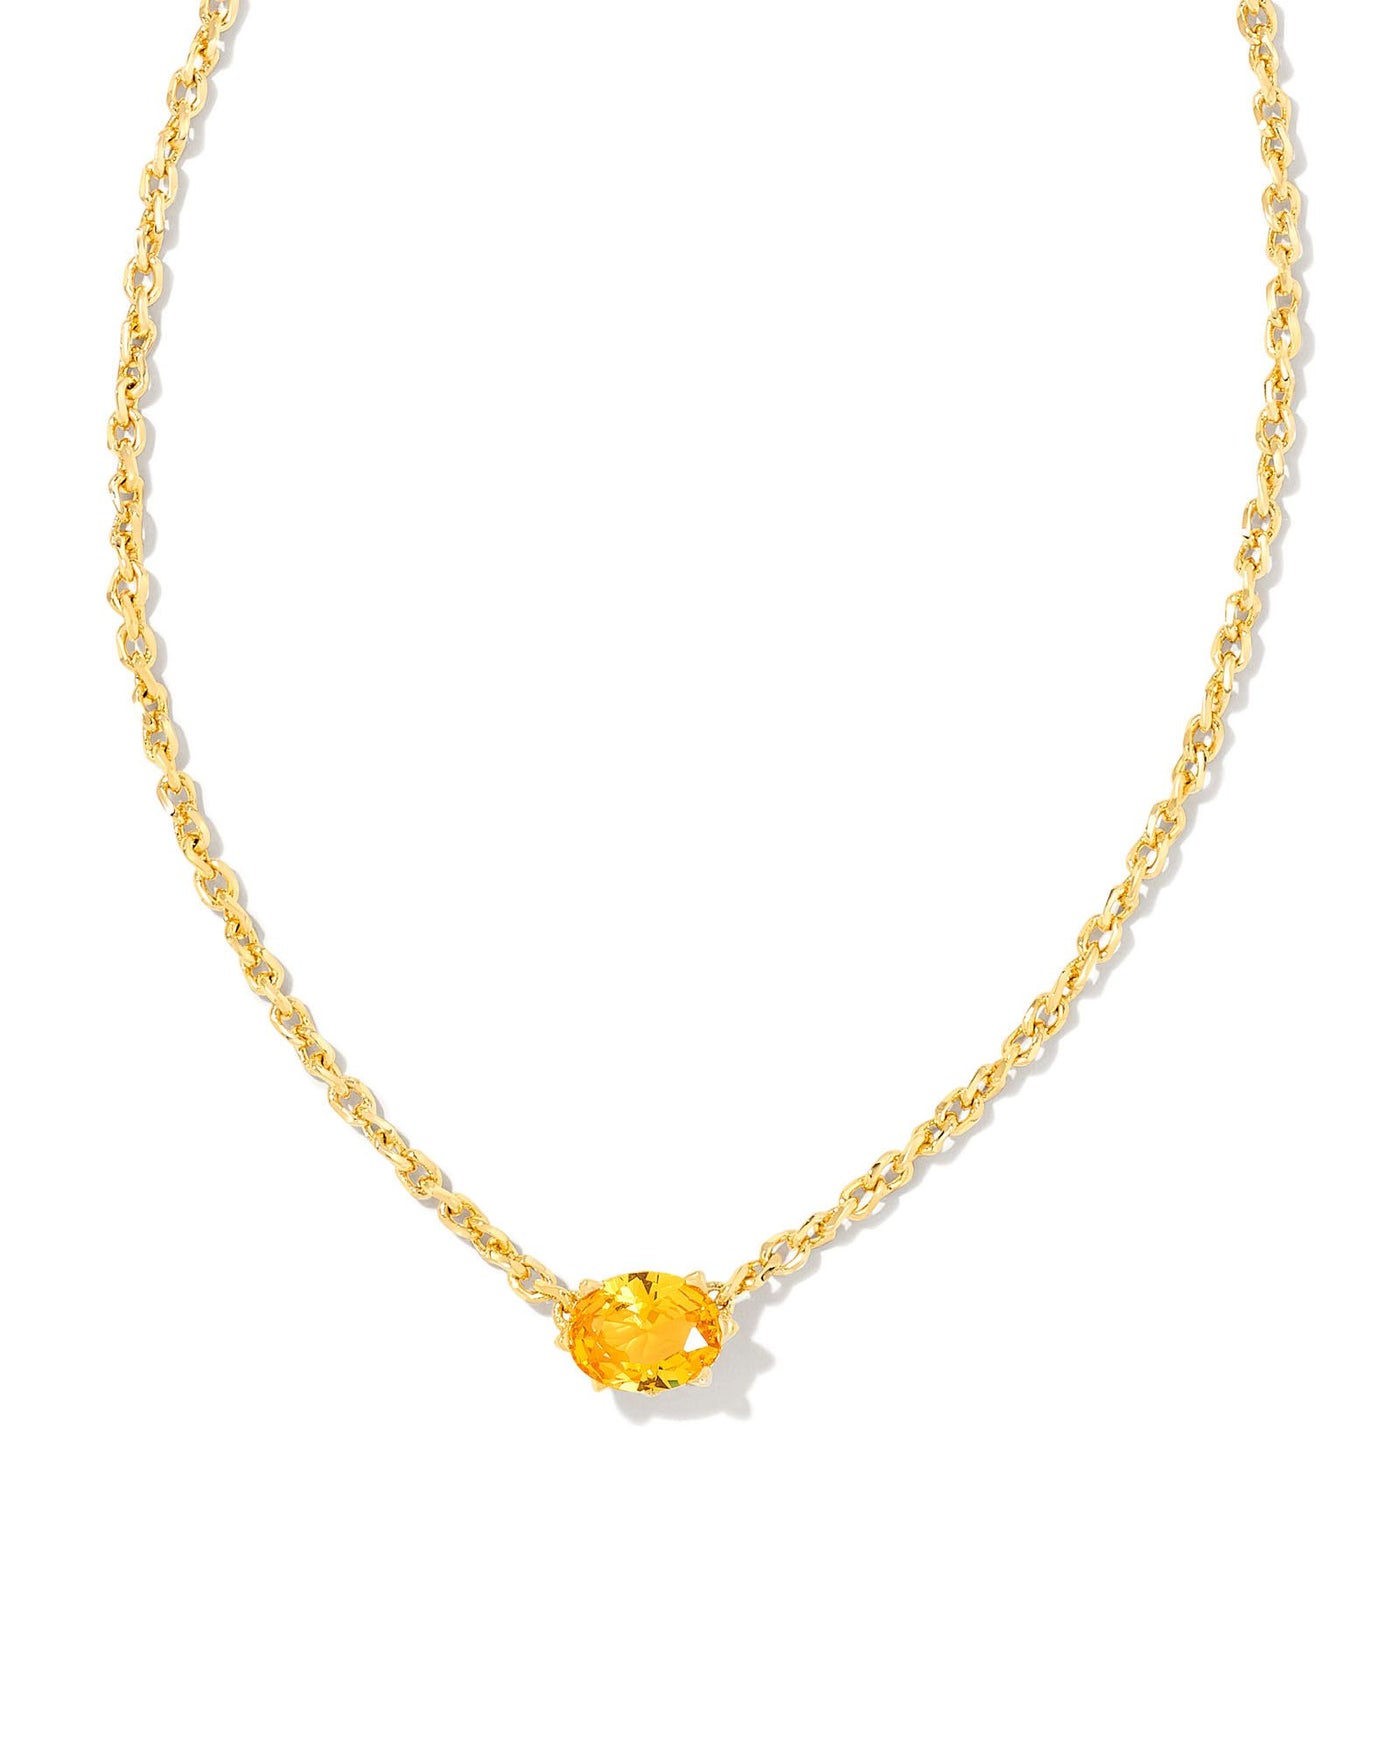 Cailin Crystal Pendant Necklace Gold Yellow Crystal on white background, front view.